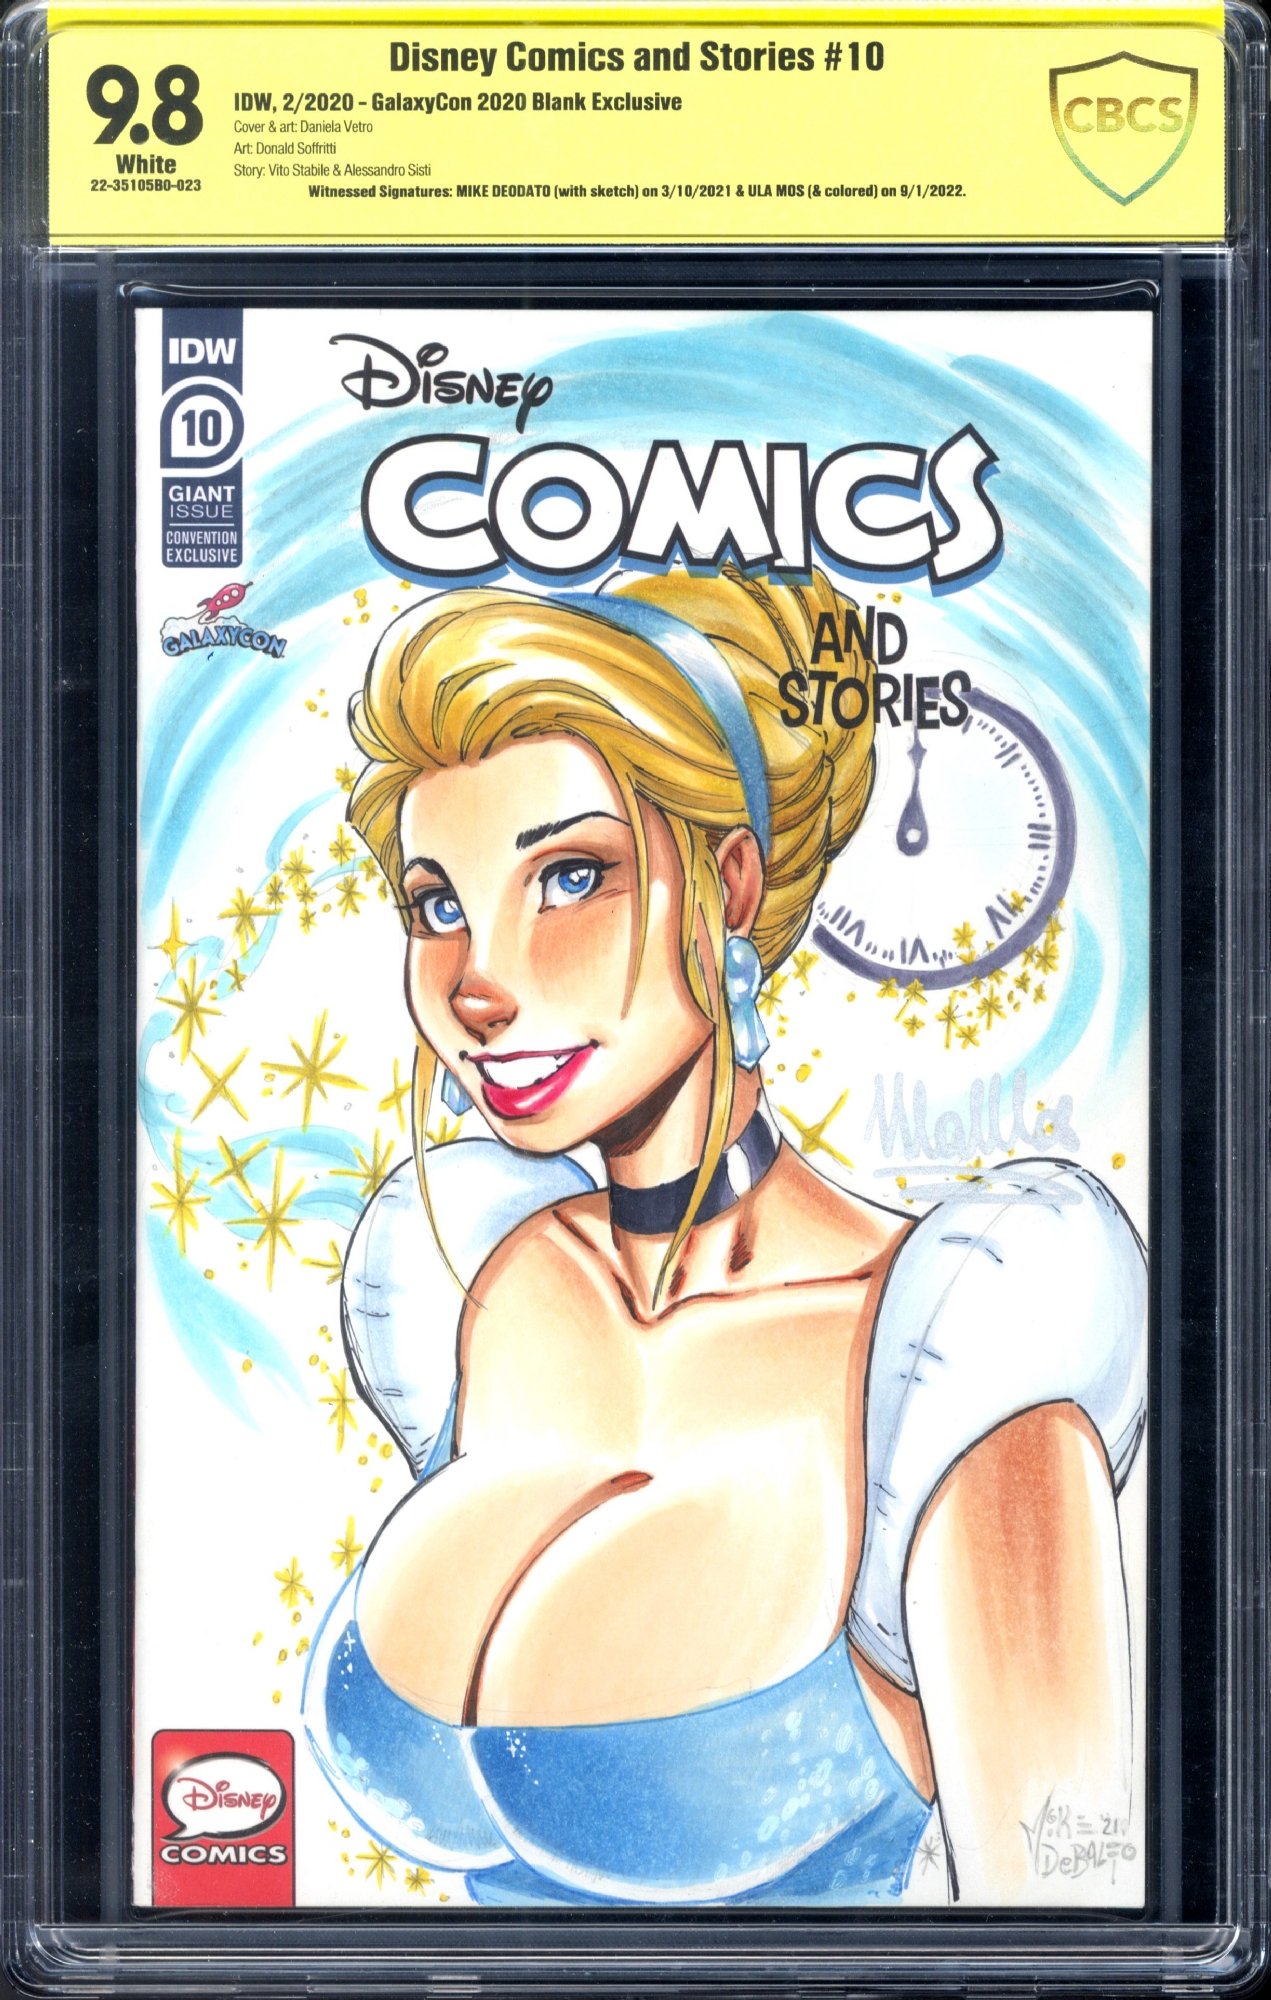 Cinderella (from Cinderella) Sketch Cover by Mike Debalfo & Ula Mós, in A  I's Sketch Covers (Disney Project) Comic Art Gallery Room